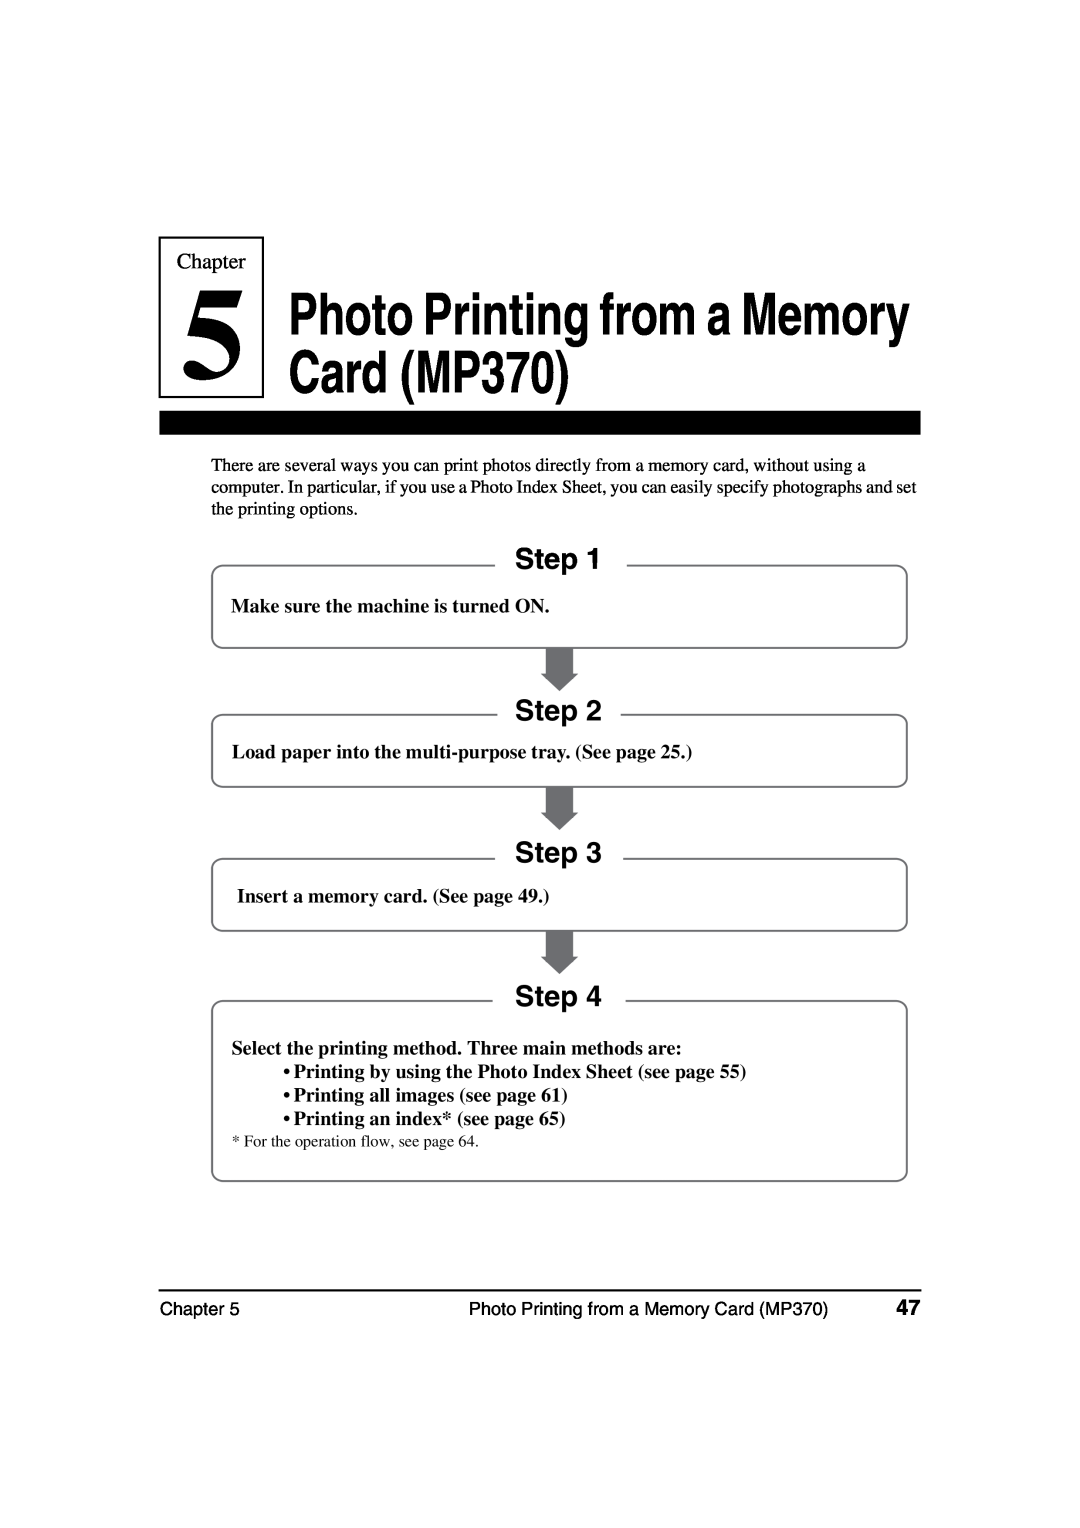 Canon MP360 manual Photo Printing from a Memory Card MP370, Step, Chapter 